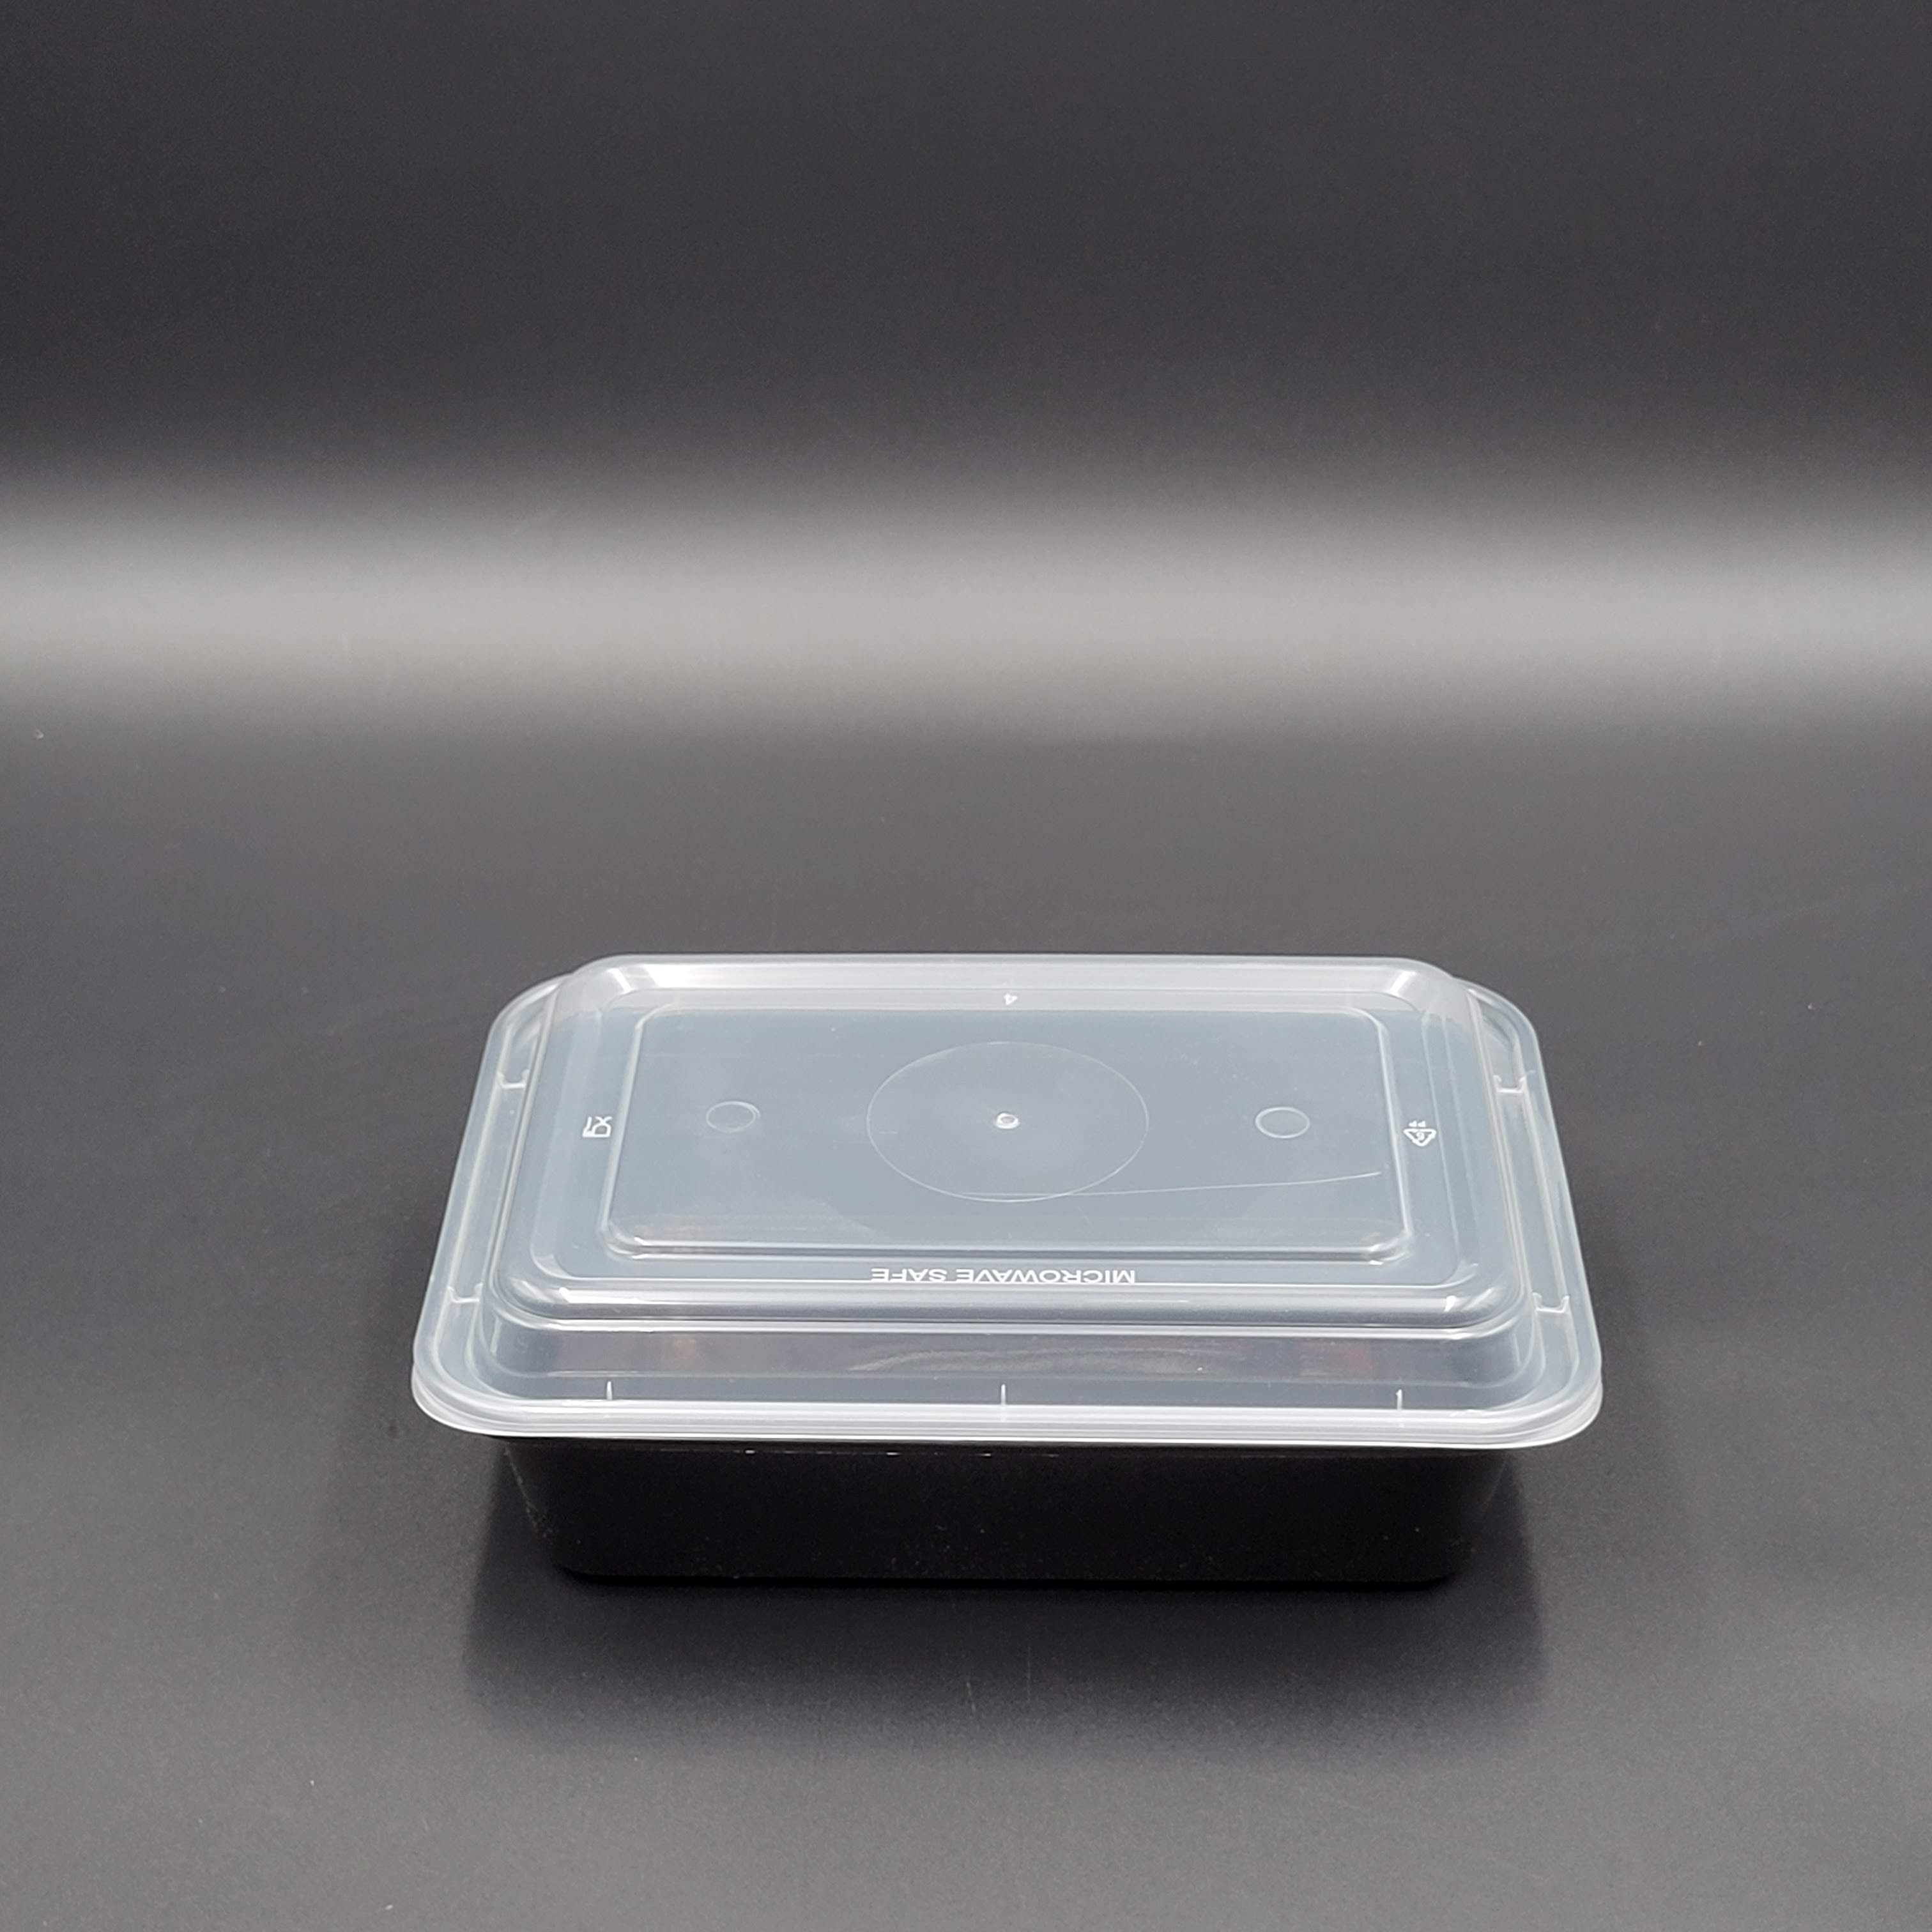 38 oz Rectangular Plastic Disposable Food Containers (50 Pack)